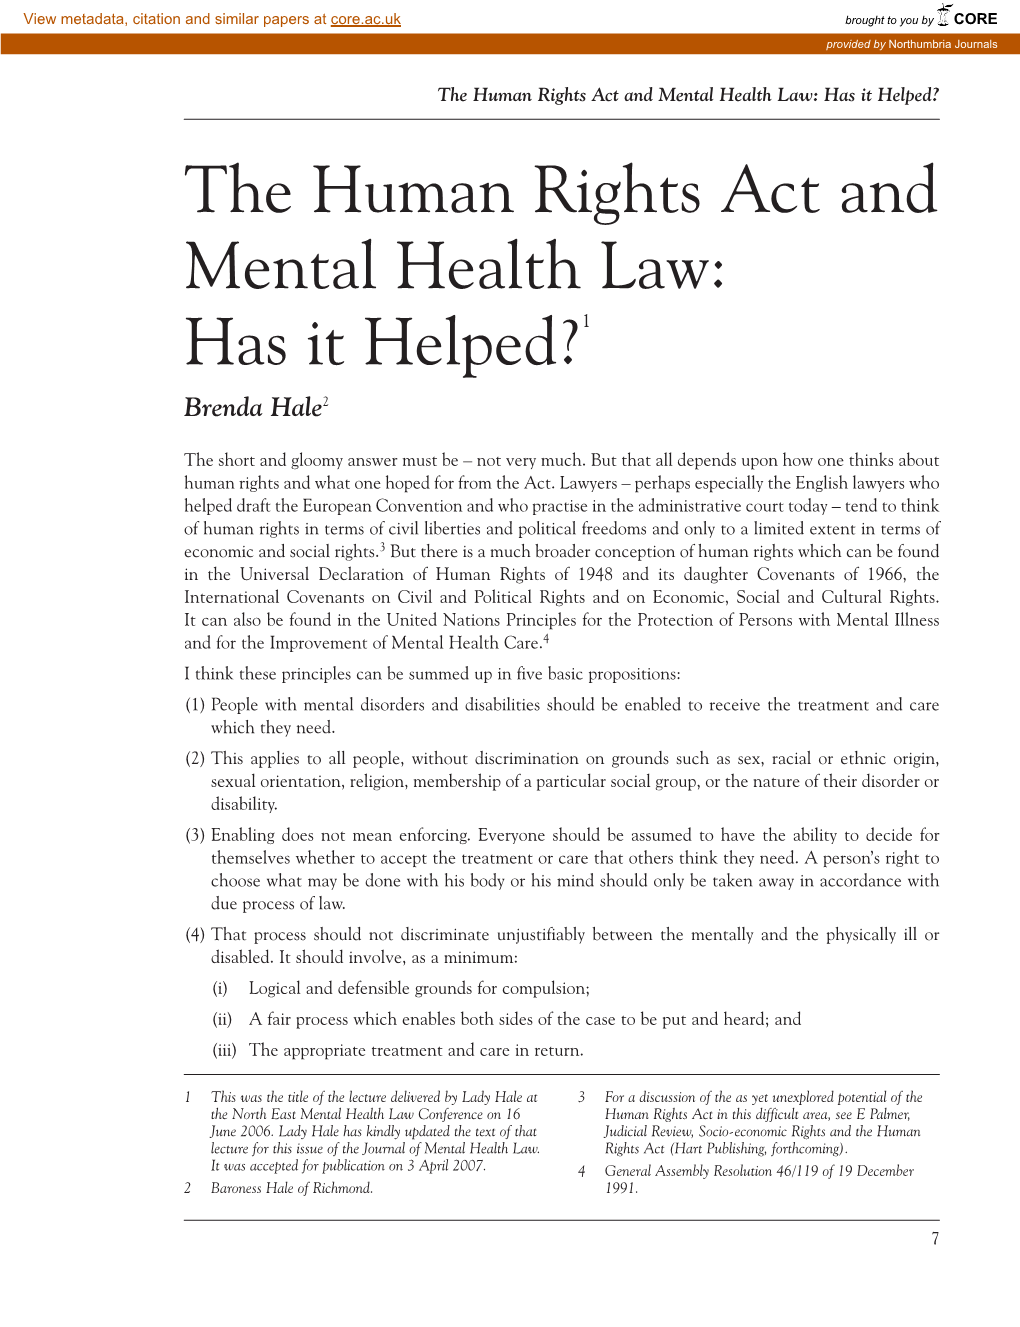 The Human Rights Act and Mental Health Law: Has It Helped? the Human Rights Act and Mental Health Law: Has It Helped?1 Brenda Hale2